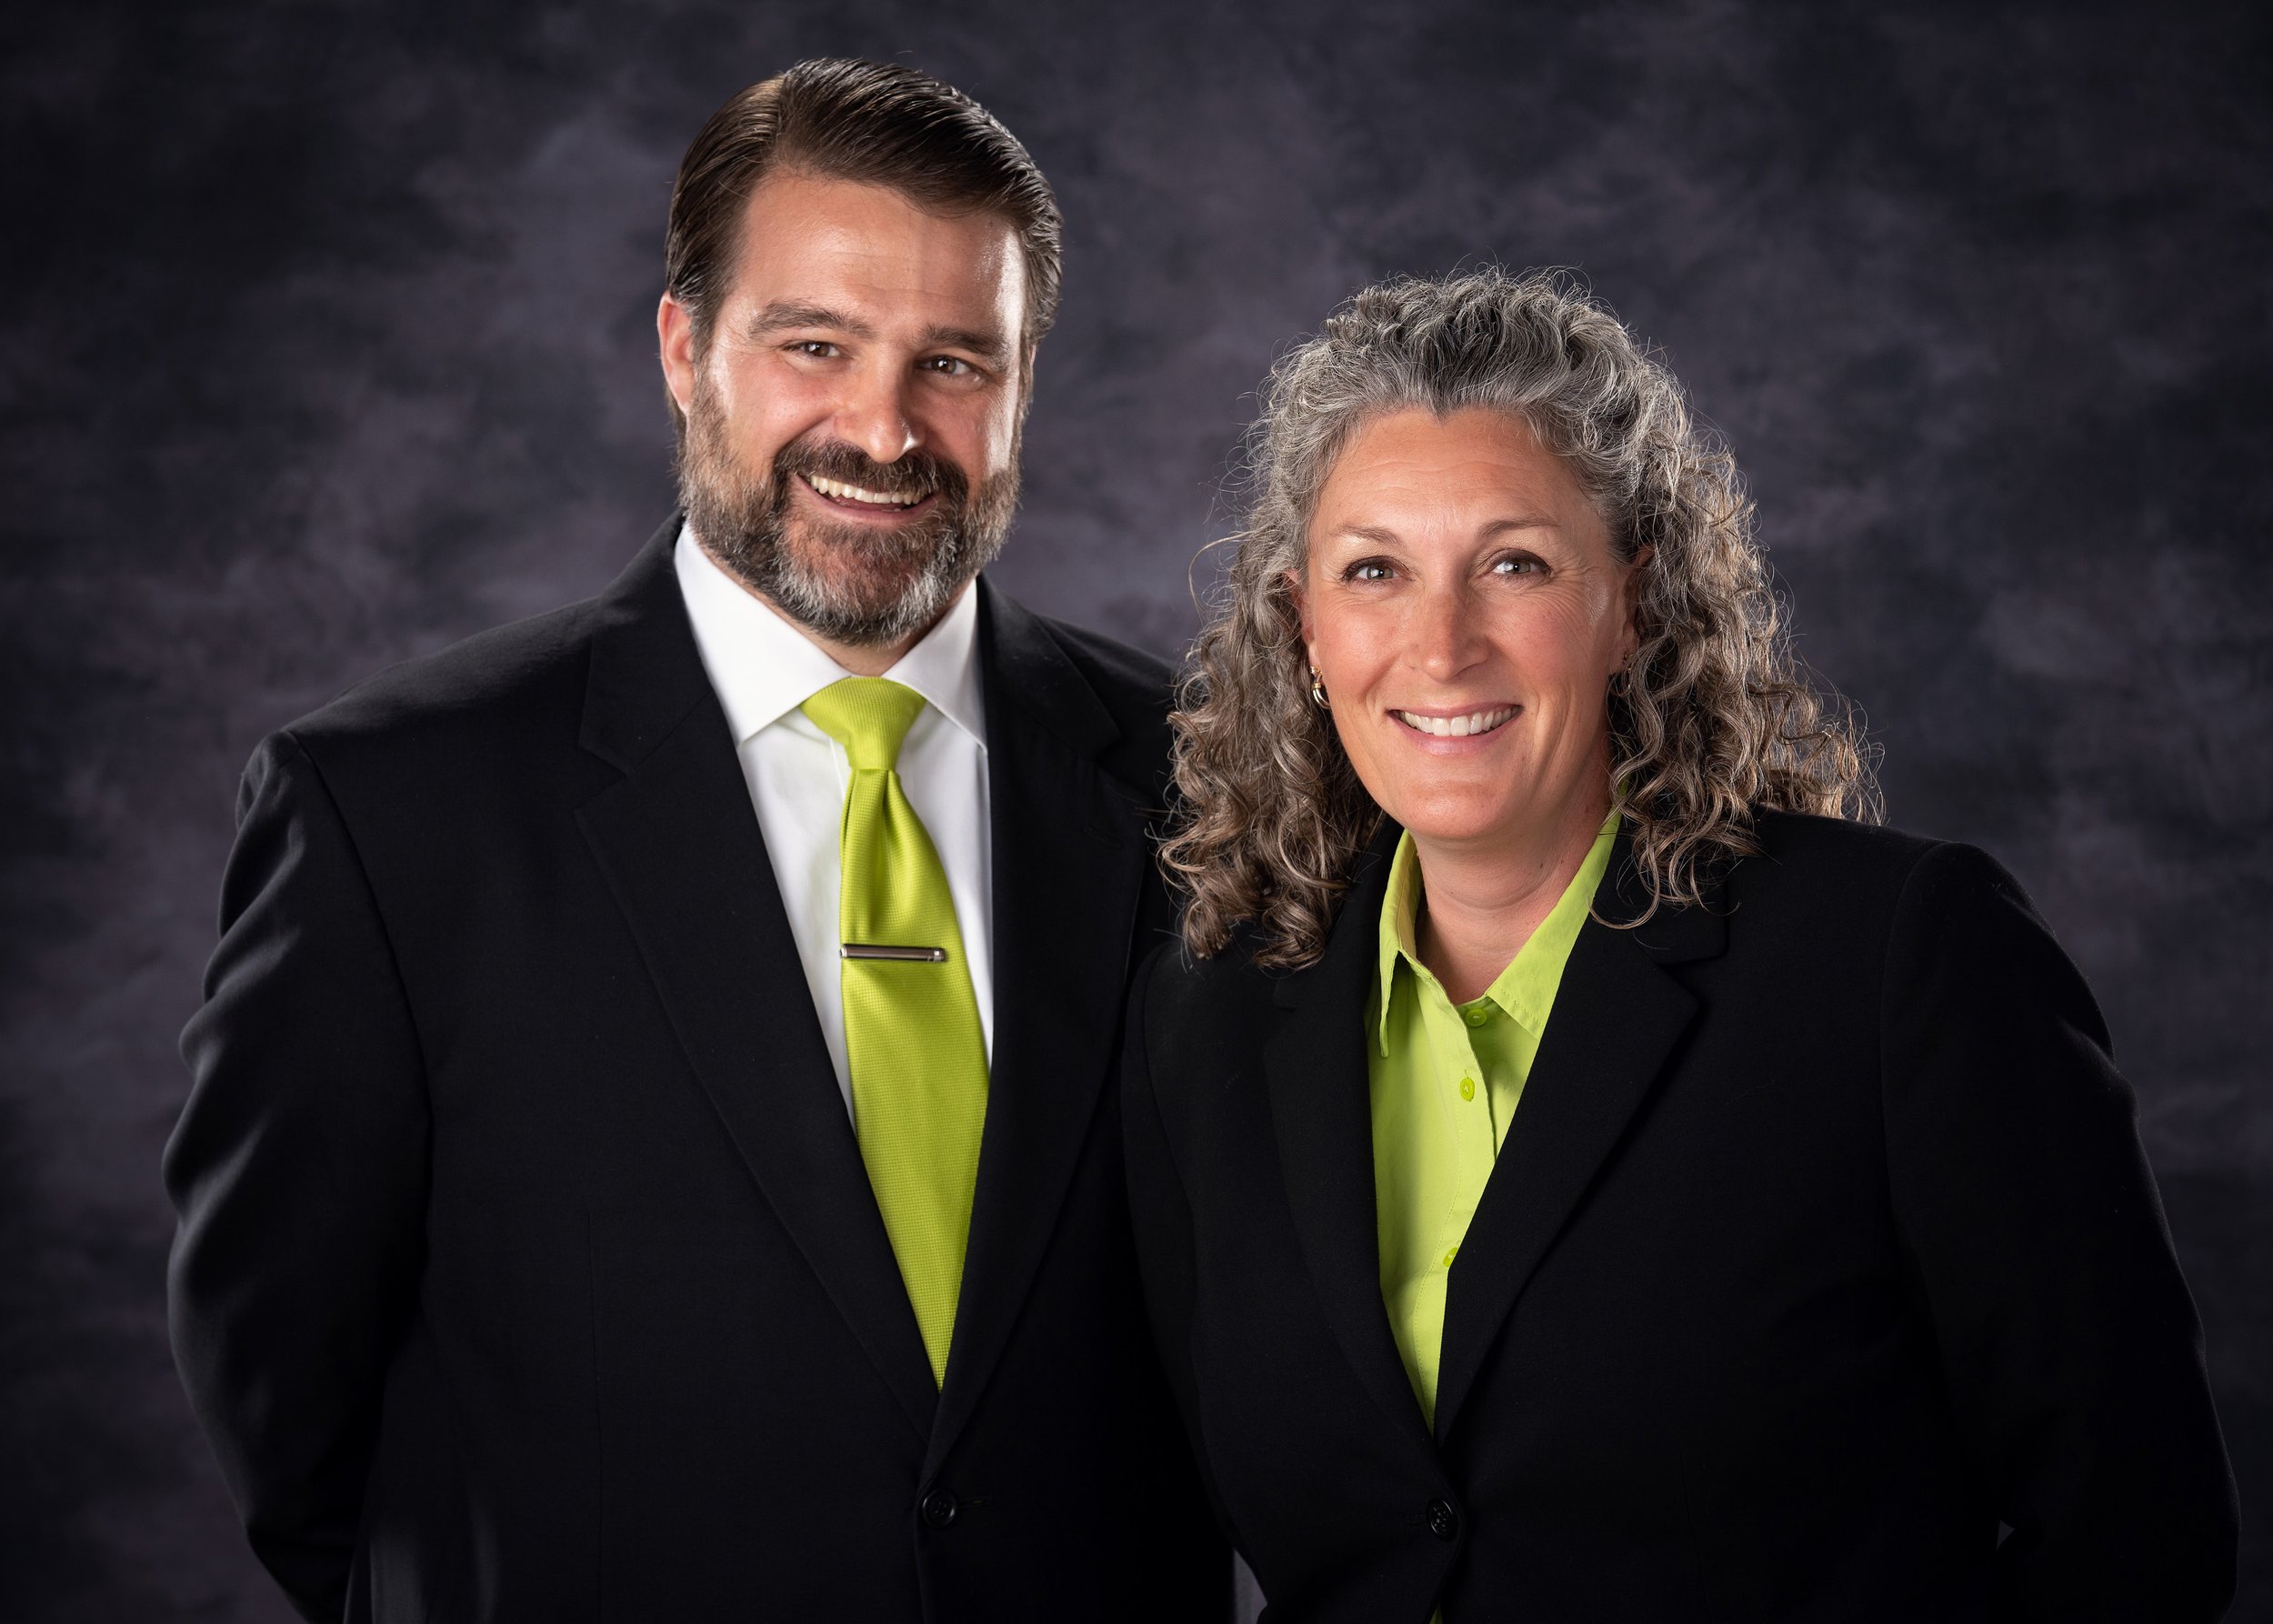 Baken-young funeral home owners portrait